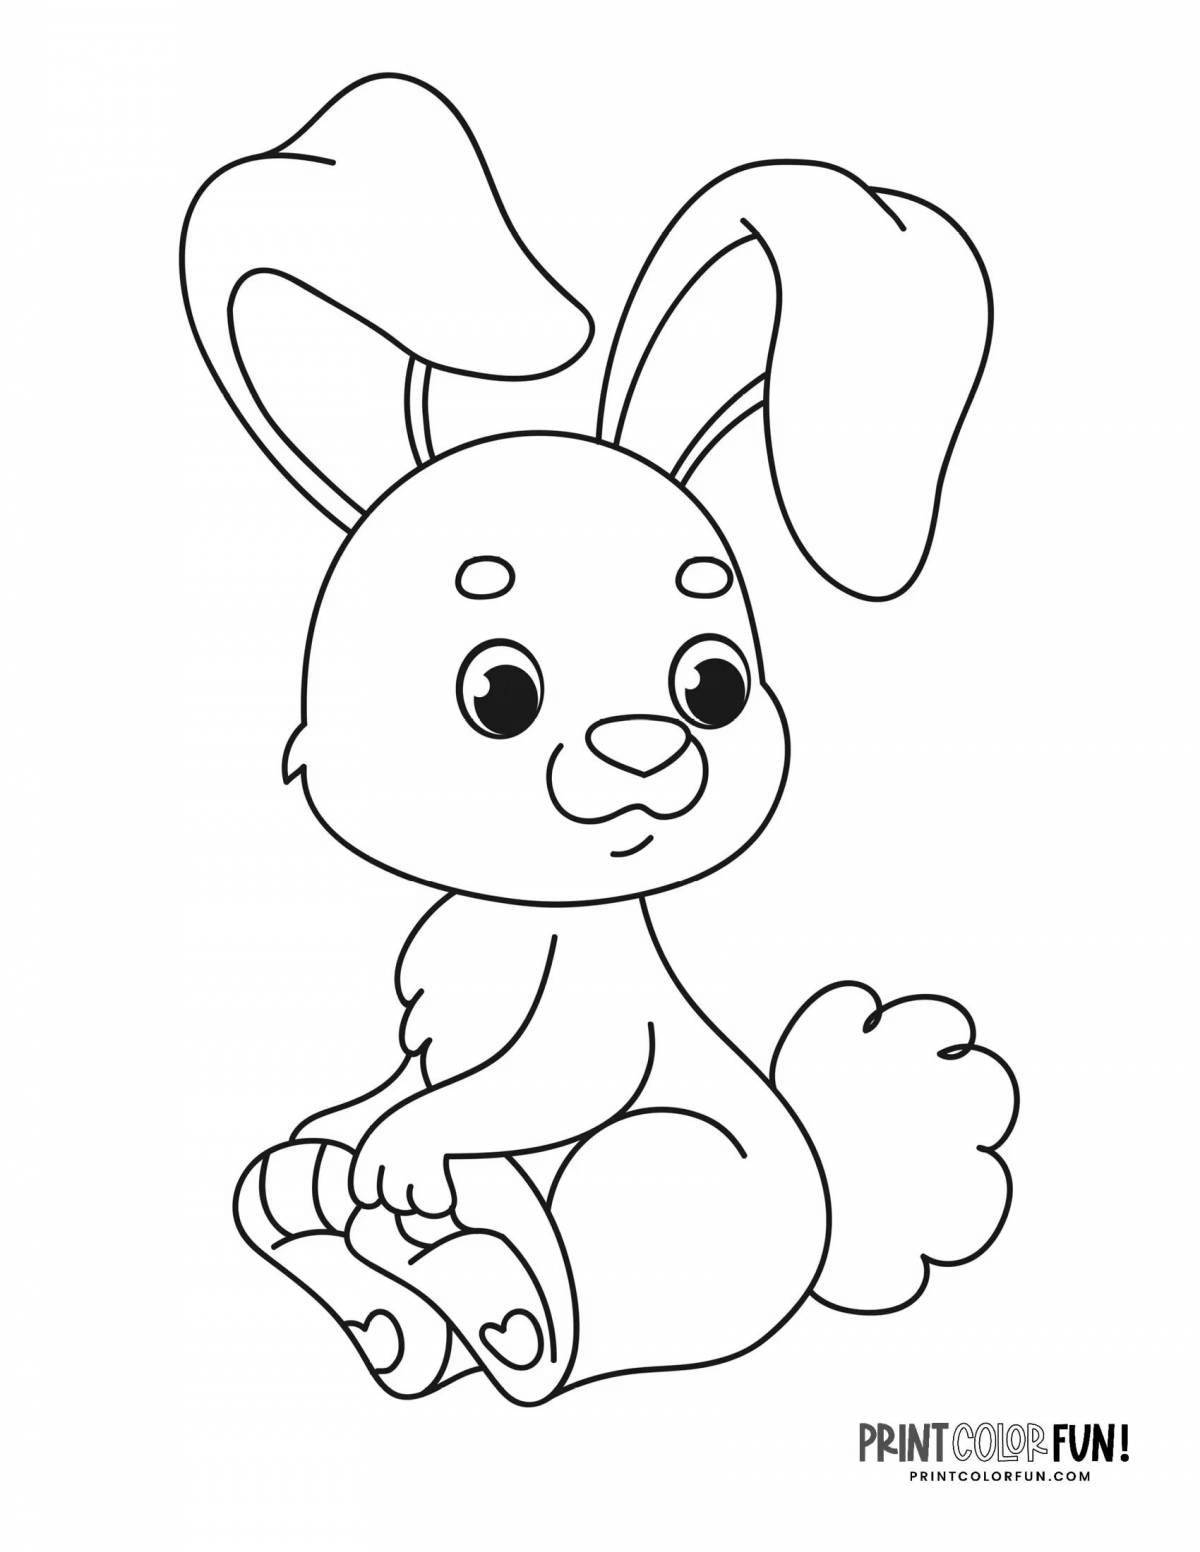 Glorious coloring rabbit for children 2 years old